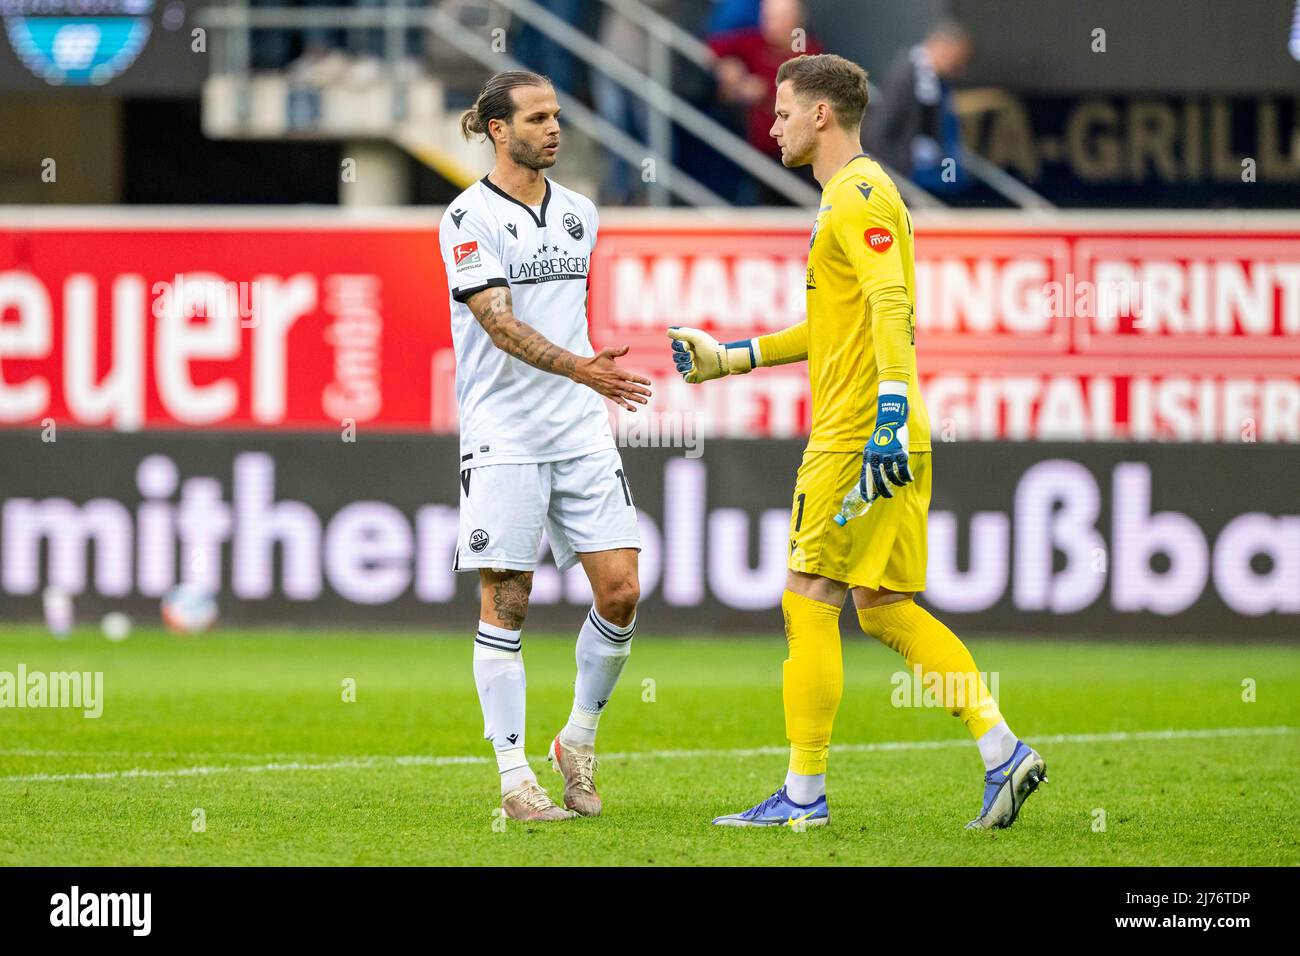 06 May 2022, North Rhine-Westphalia, Paderborn: Soccer: 2. Bundesliga, SC Paderborn 07 - SV Sandhausen, Matchday 33, Benteler-Arena: Sandhausen's Dennis Diekmeier (l) and Sandhausen's goalkeeper Patrick Drewes are disappointed. Photo: David Inderlied/dpa - IMPORTANT NOTE: In accordance with the requirements of the DFL Deutsche Fußball Liga and the DFB Deutscher Fußball-Bund, it is prohibited to use or have used photographs taken in the stadium and/or of the match in the form of sequence pictures and/or video-like photo series. Stock Photo